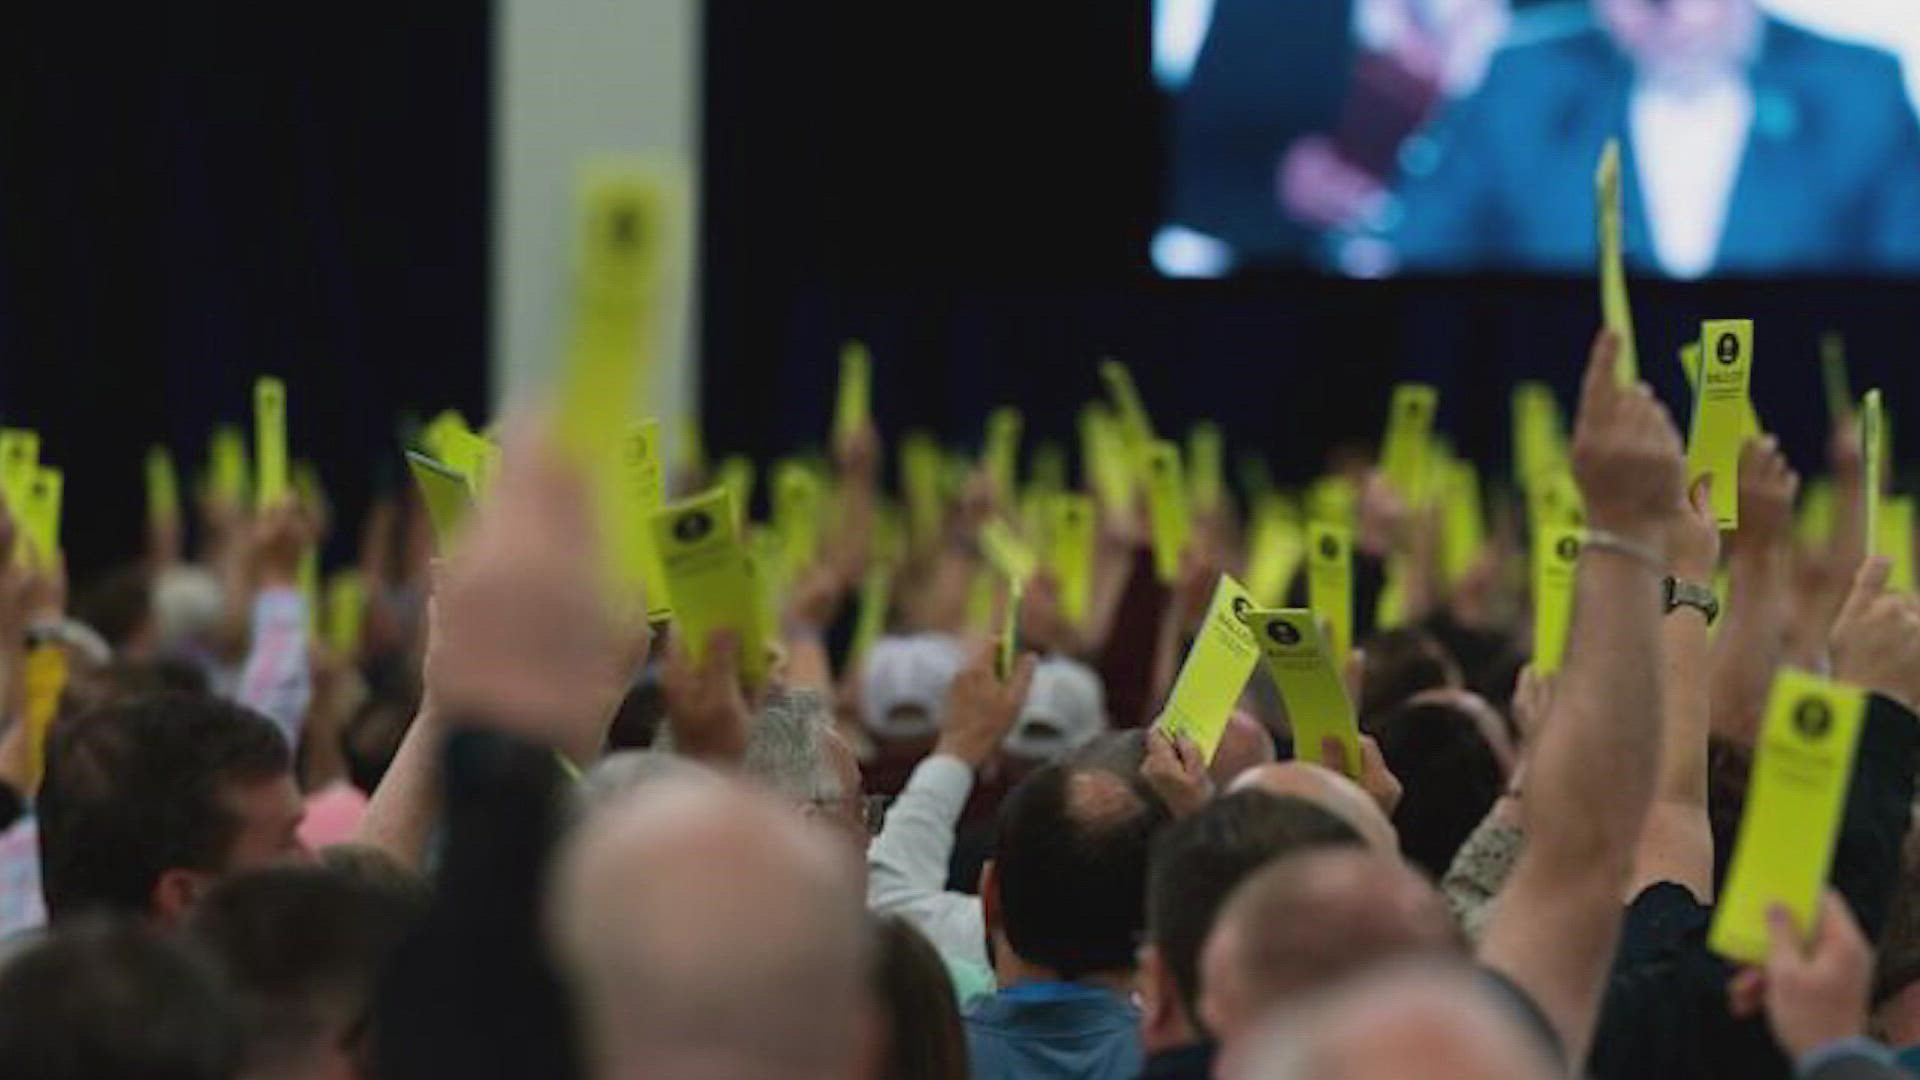 Bart Barber, the newly elected president of the Southern Baptist Convention, is vowing to expedite sex abuse reforms in the nation’s largest Protestant denomination.